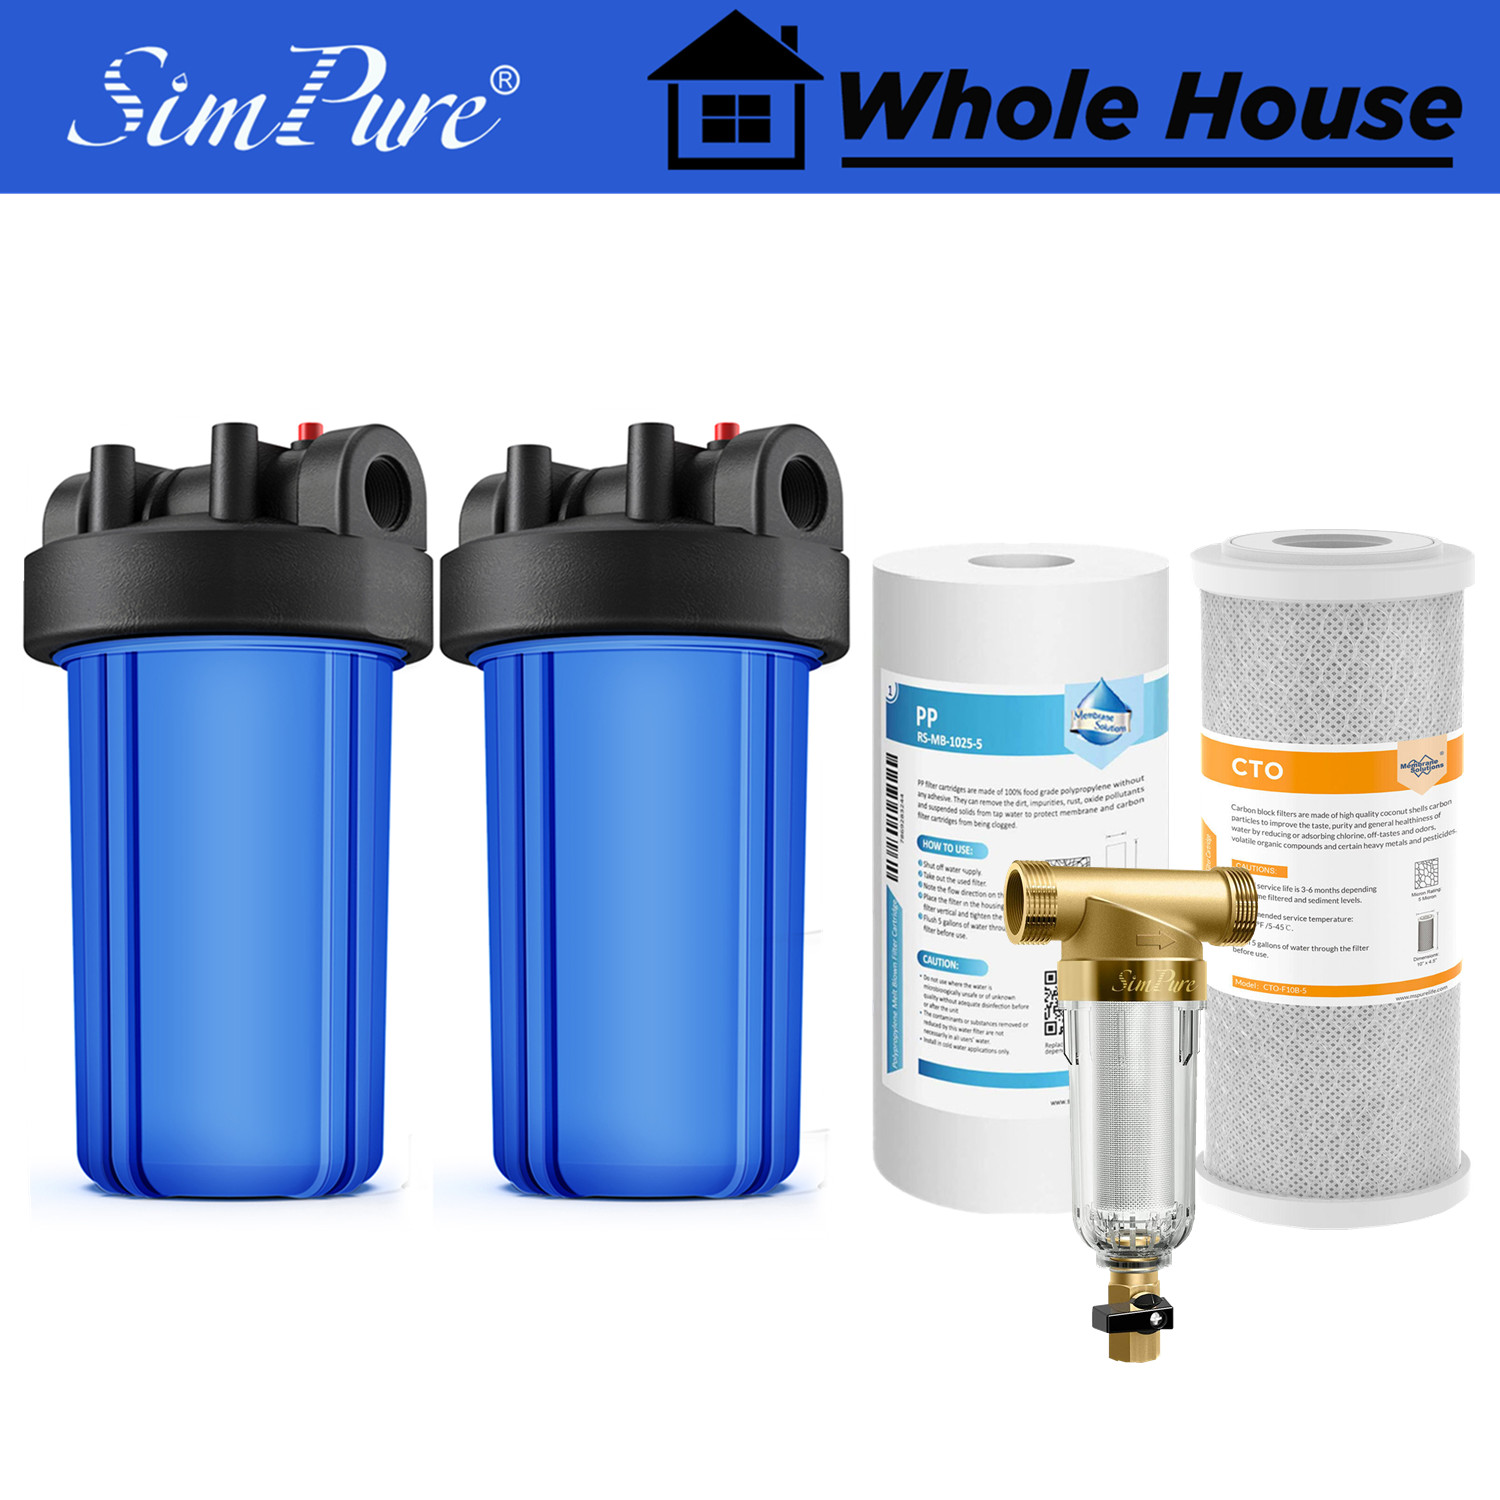 4 10" x 4.5" Big Blue Carbon Block  Whole House Water Filter best value on 